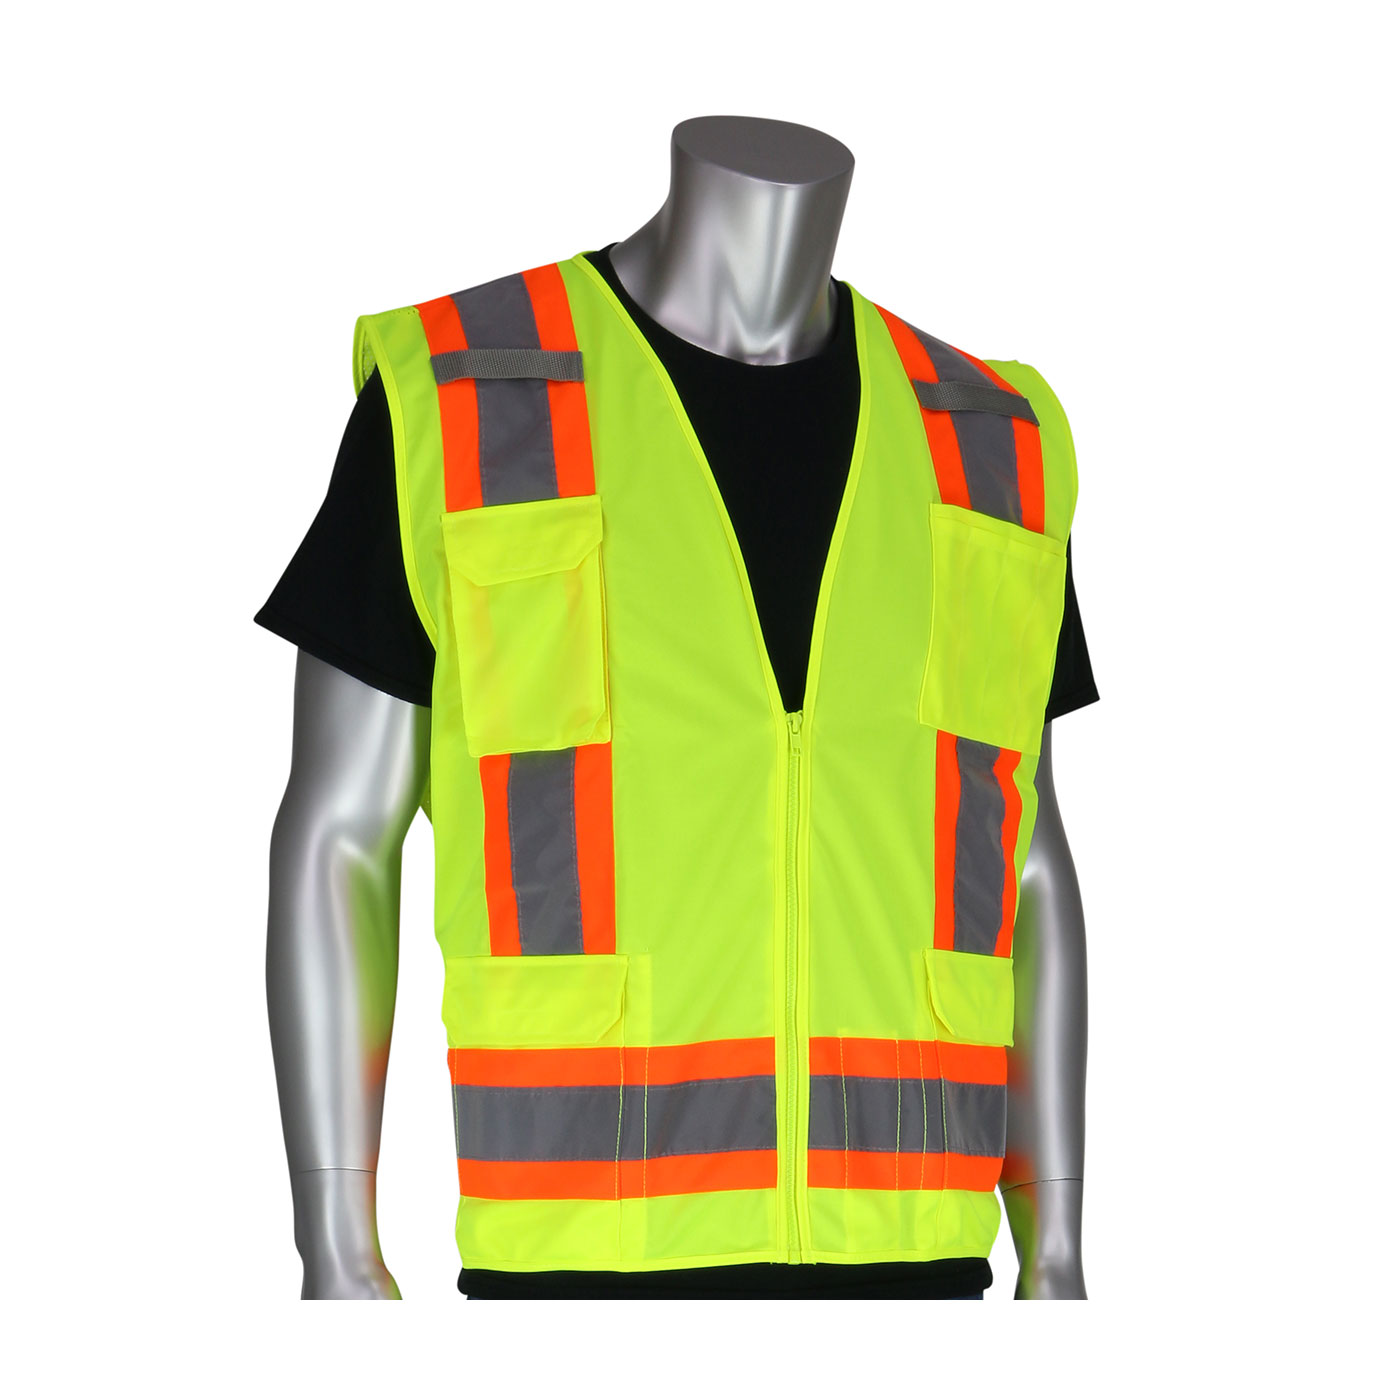 PIP 302-0500-ORG/L ANSI Type R Class 2 Two-Tone Eleven Pocket Orange Surveyors Vest with Solid Front and Mesh Back - Large PID-3020500 OR L